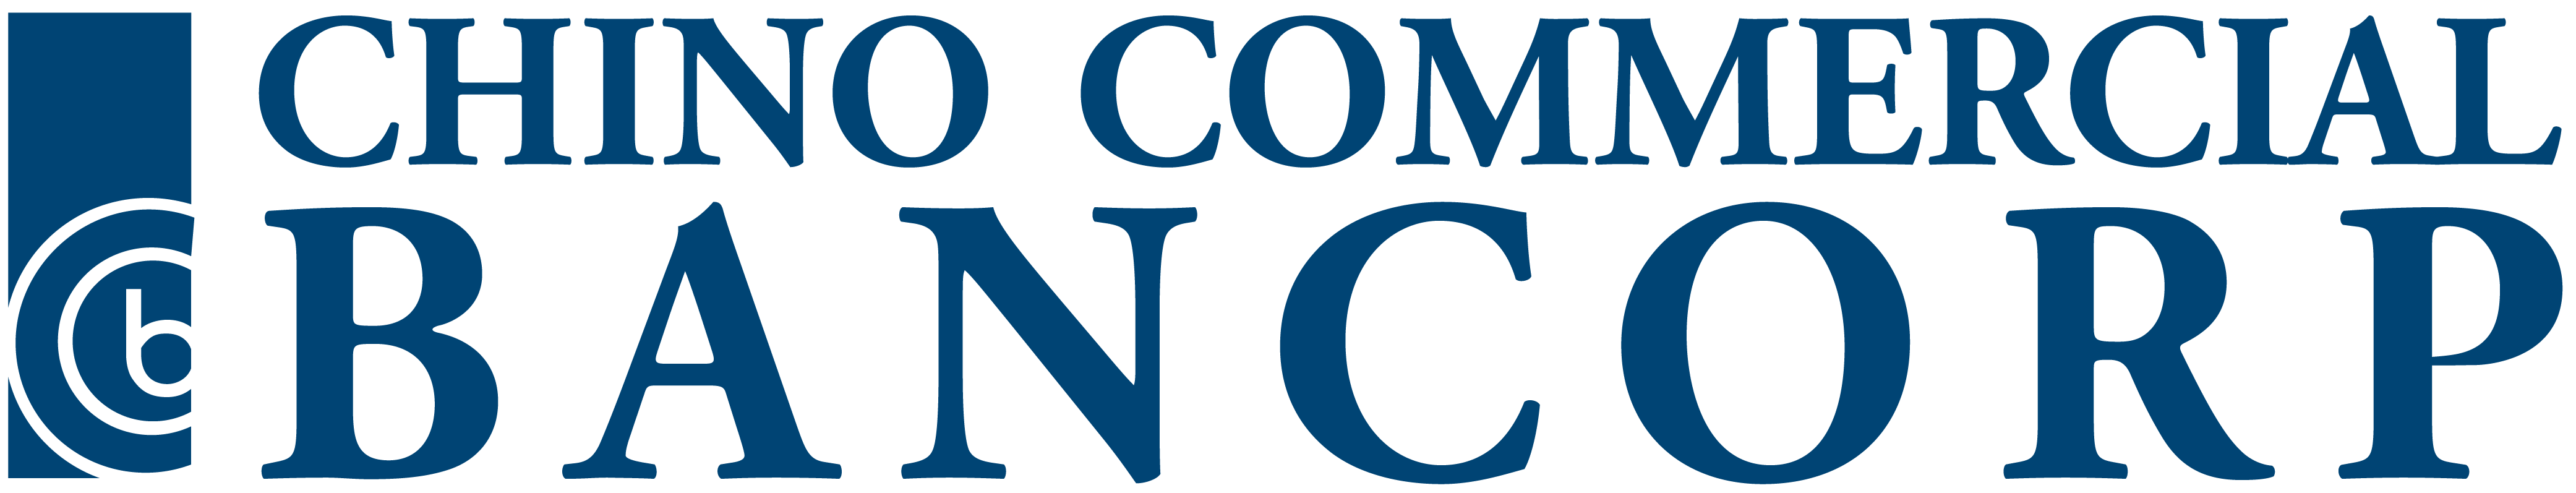 ChinoCommercialBancorp_logo_blue-01.png